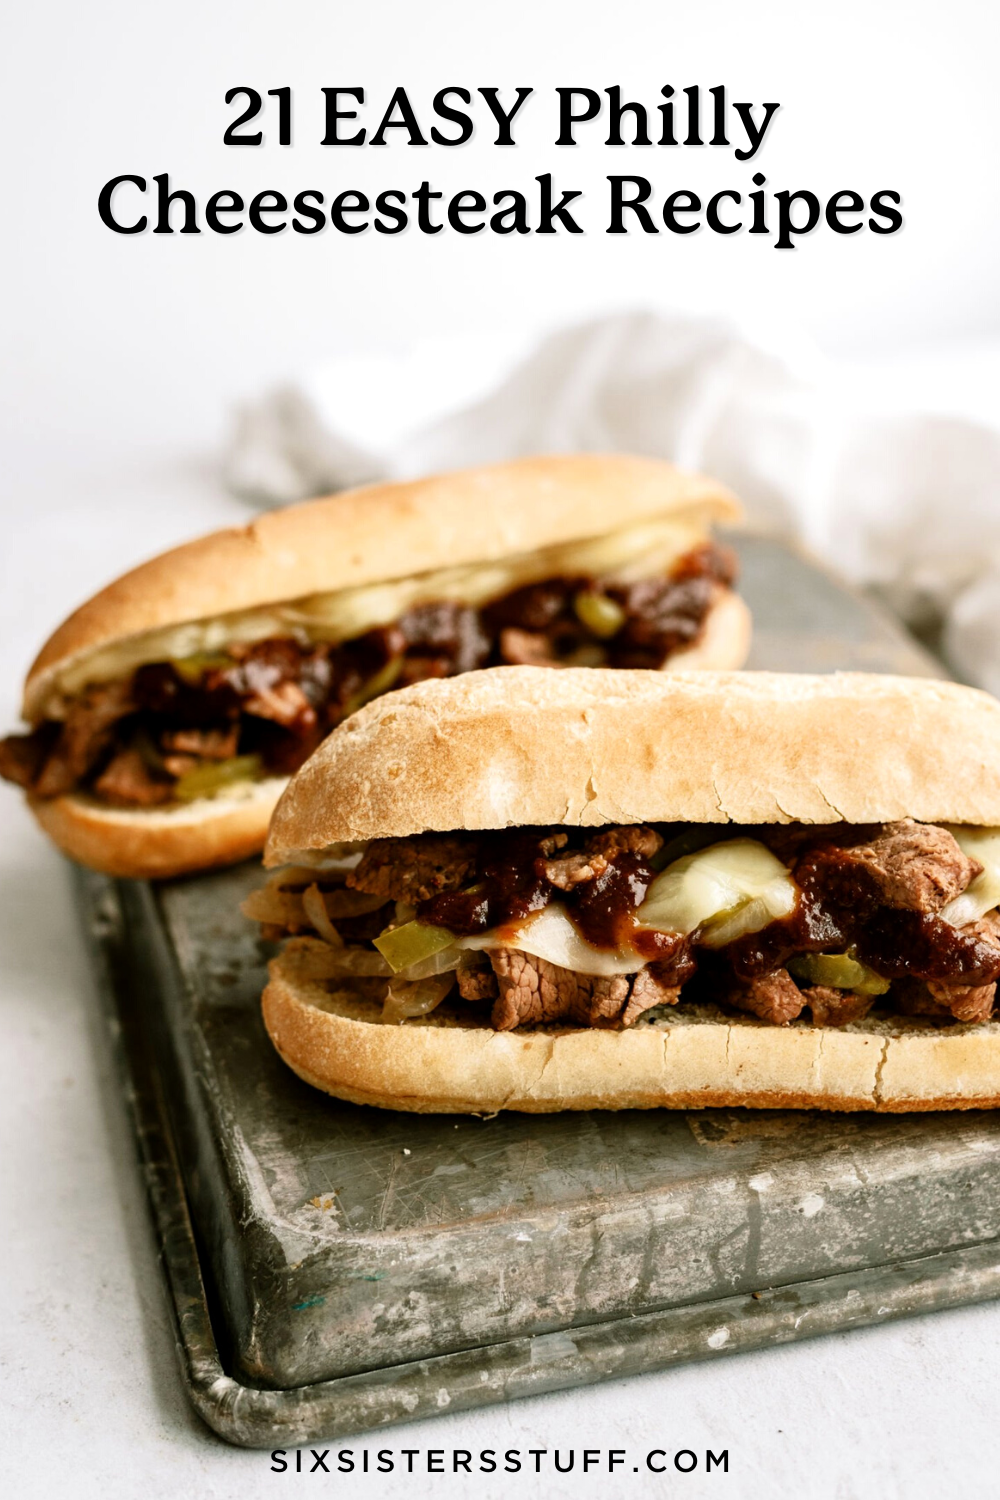 21 EASY Philly Cheesesteak Recipes